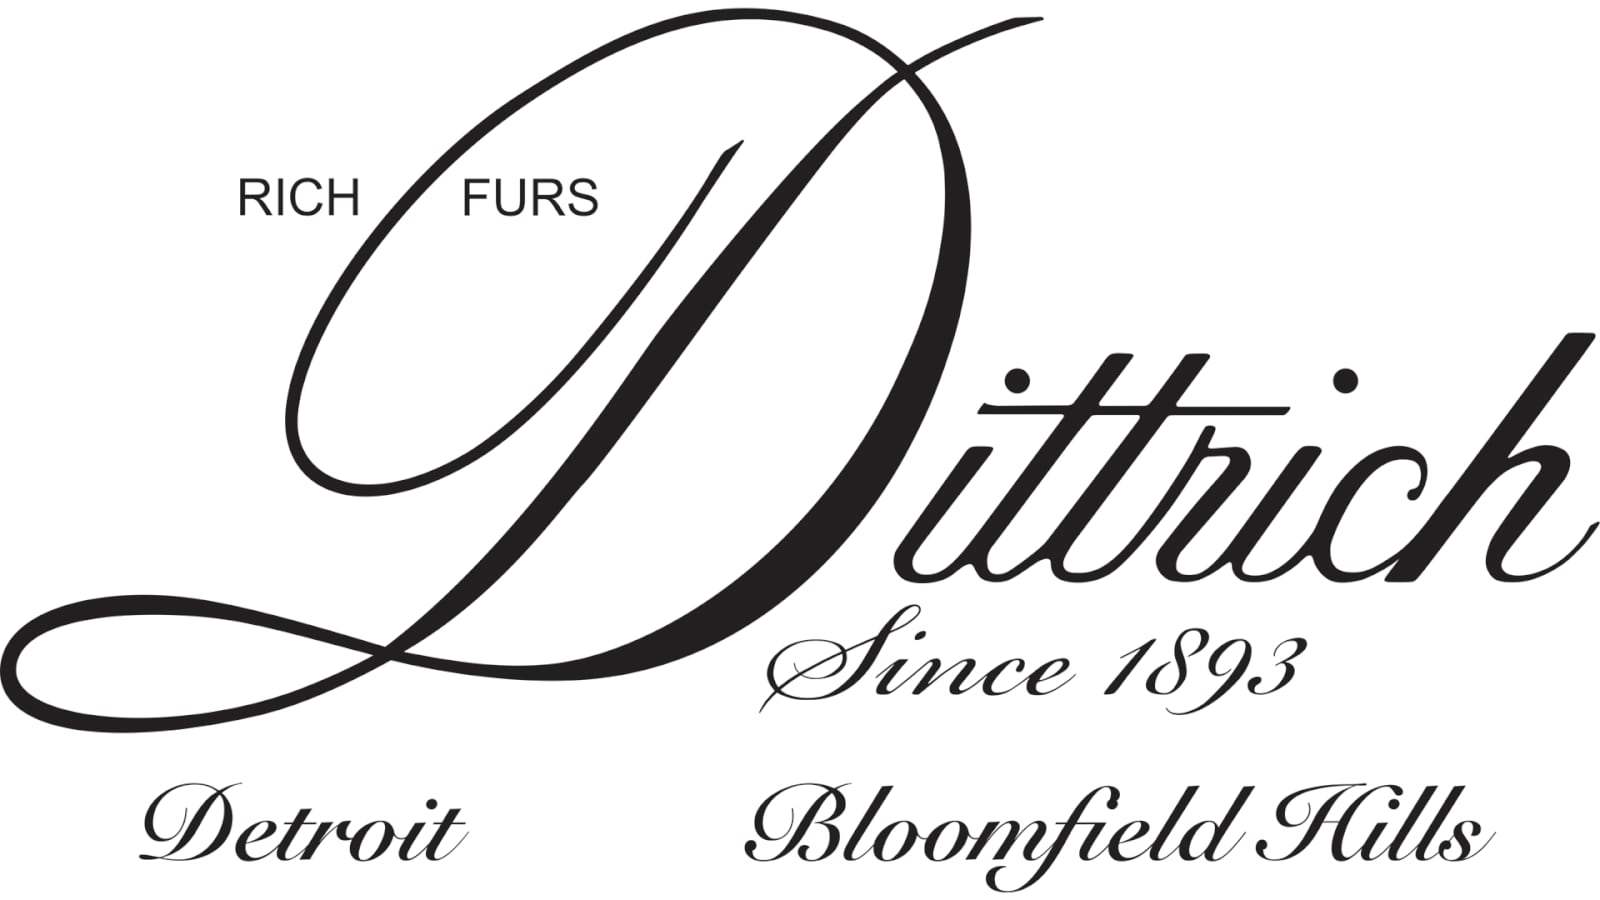 Dittrich Official Contest Rules